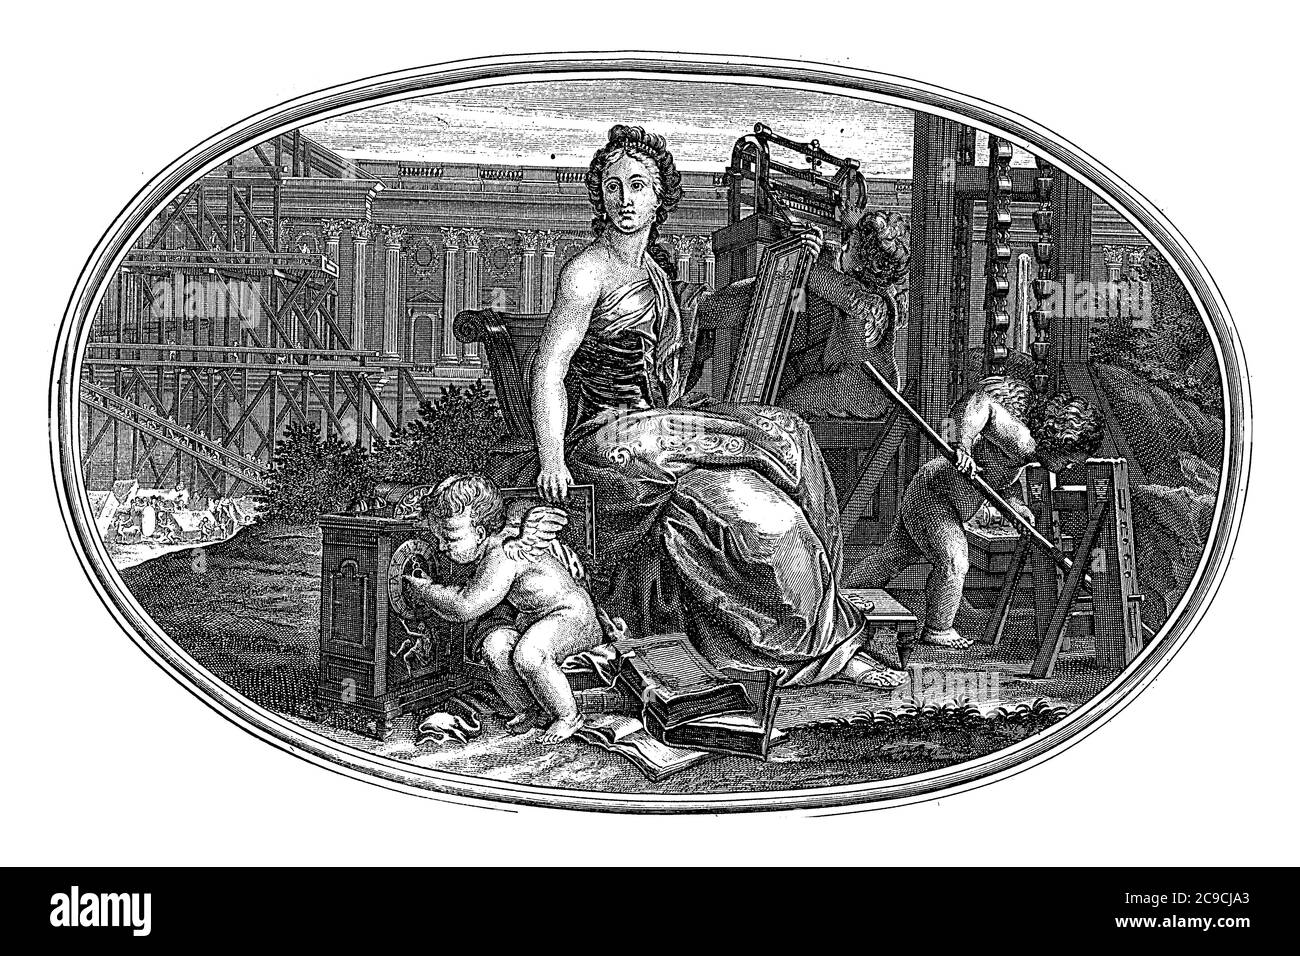 Ceiling piece with the personification of Mechanica. She sits with a yardstick in the middle of constructions and construction activities. Next to her Stock Photo